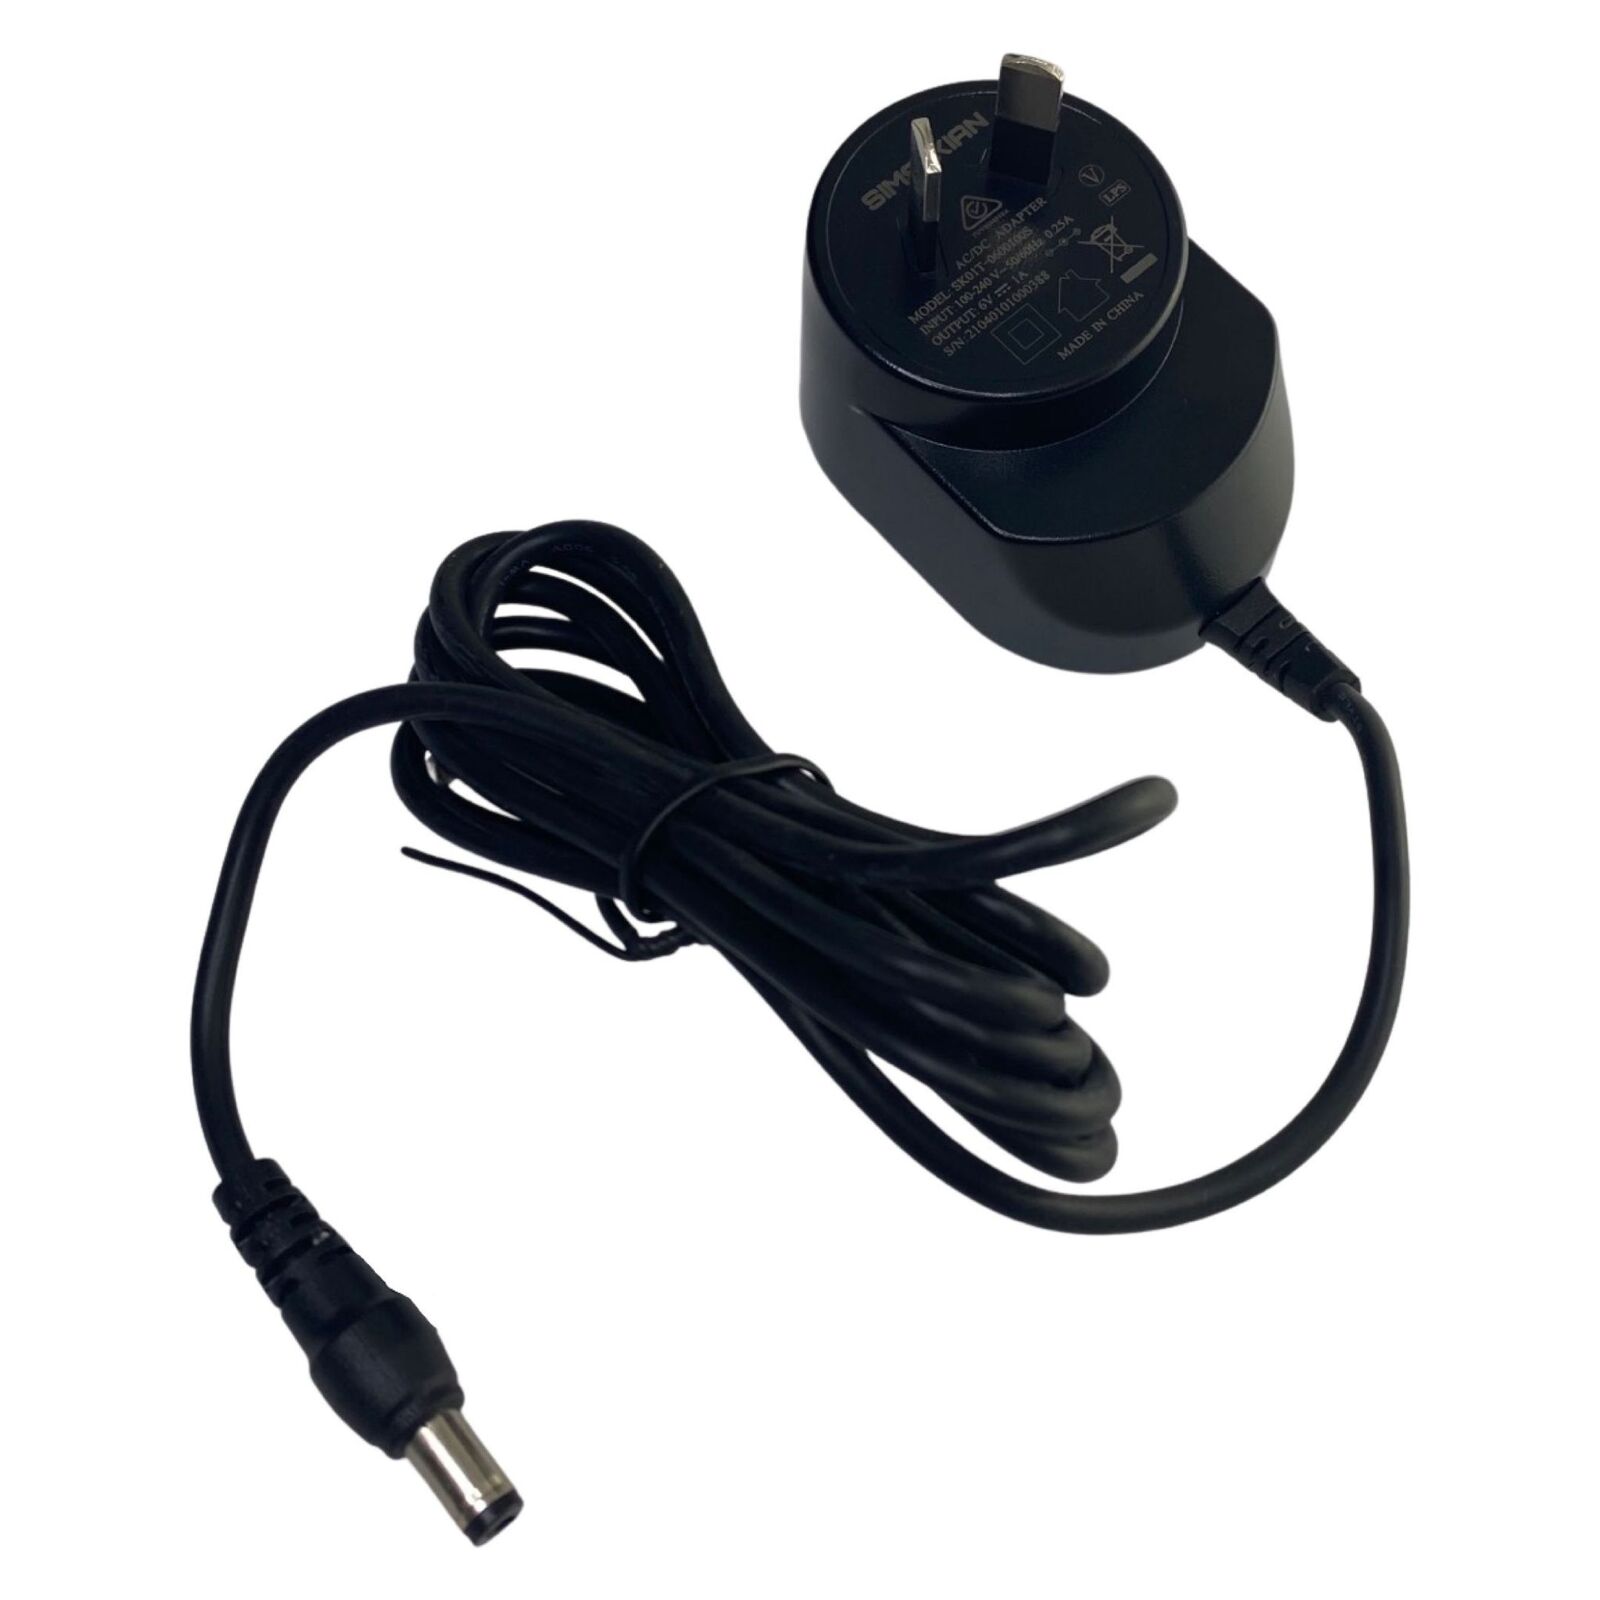 6V DC 1A Power Adapter with 2.1 DC Plug